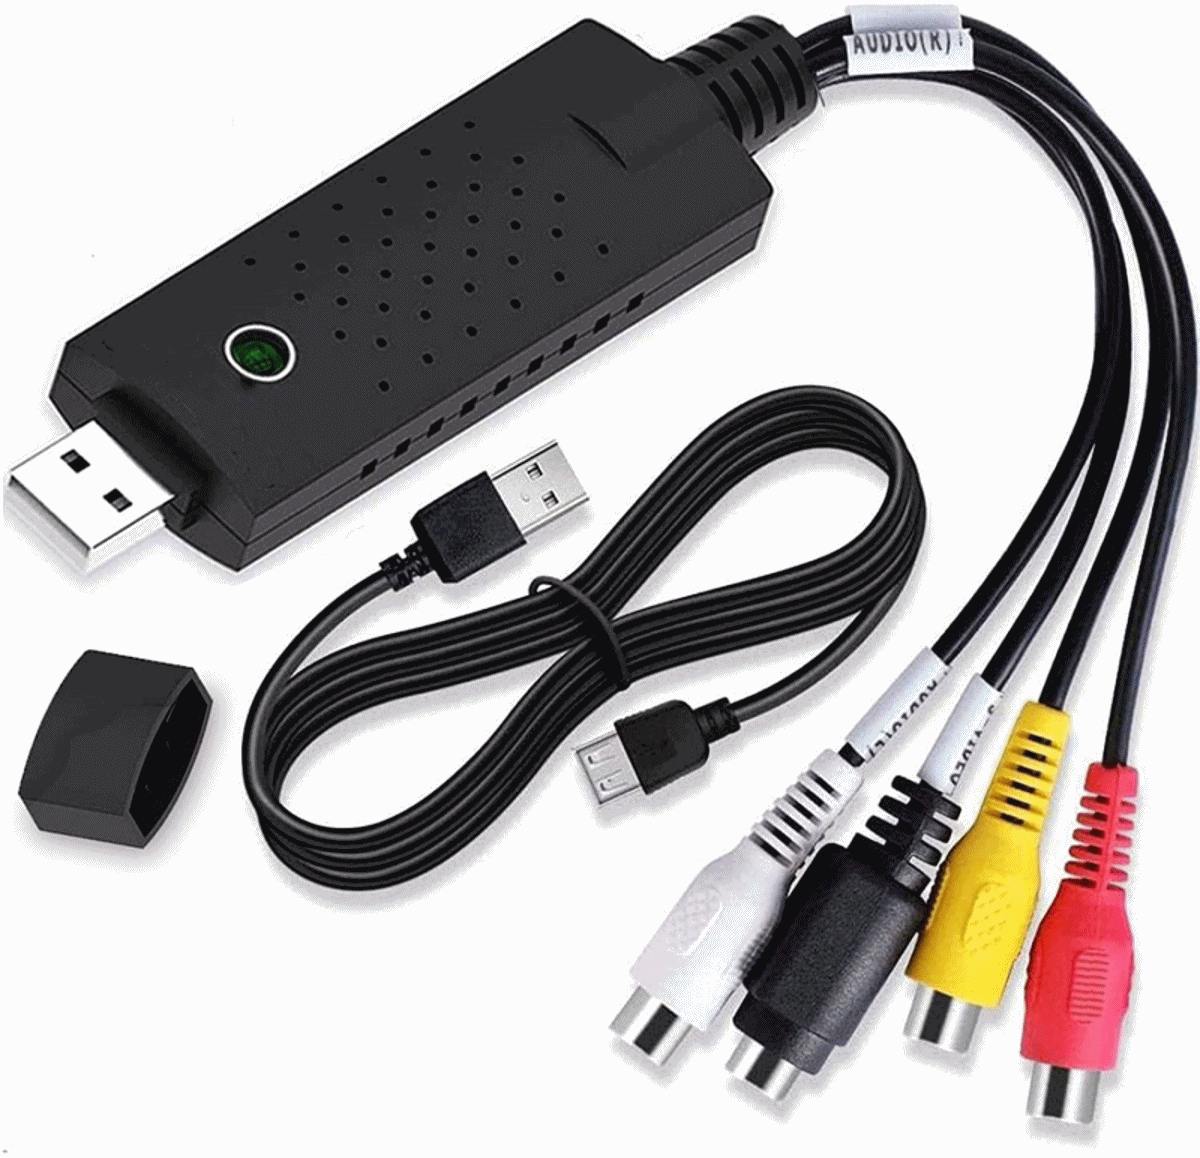 Motorized Vhs C To Vhs Cassette Adapter For Svhs Camcorders Jvc